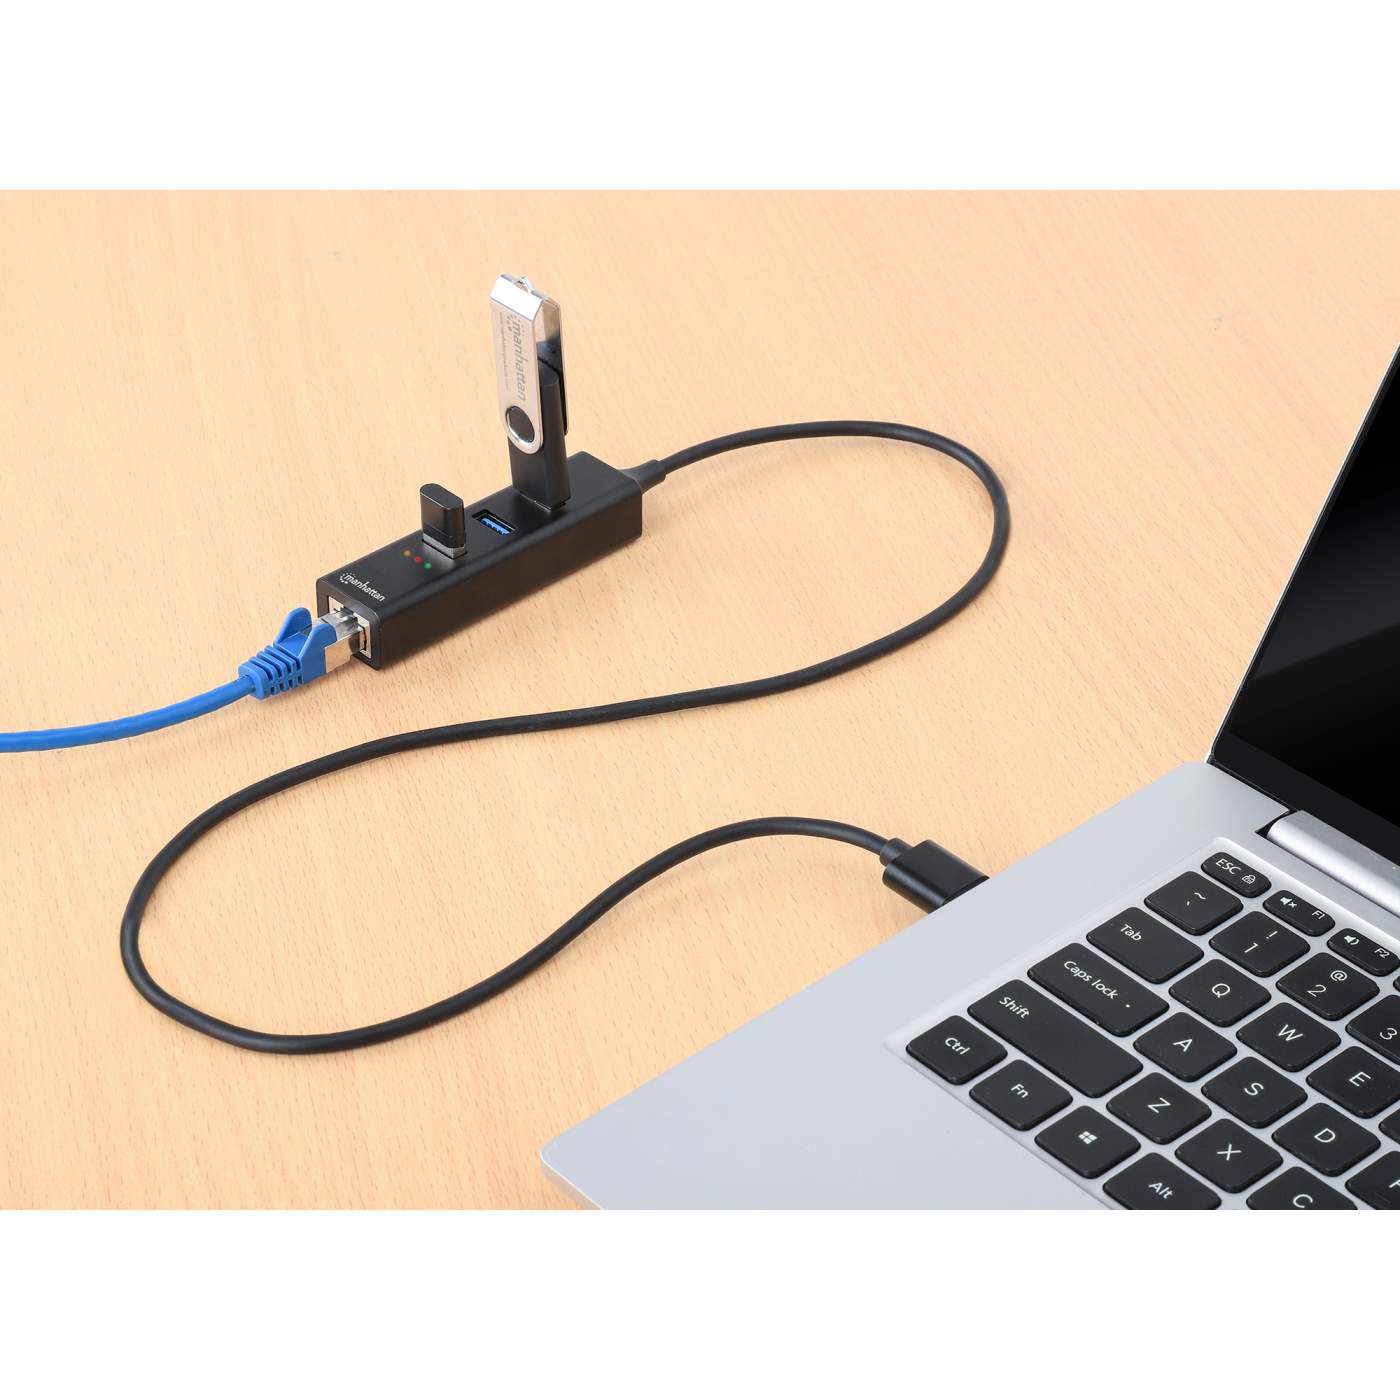 USB 3.0 hub with 4 ports and on/off switches - external power supply  possible - black